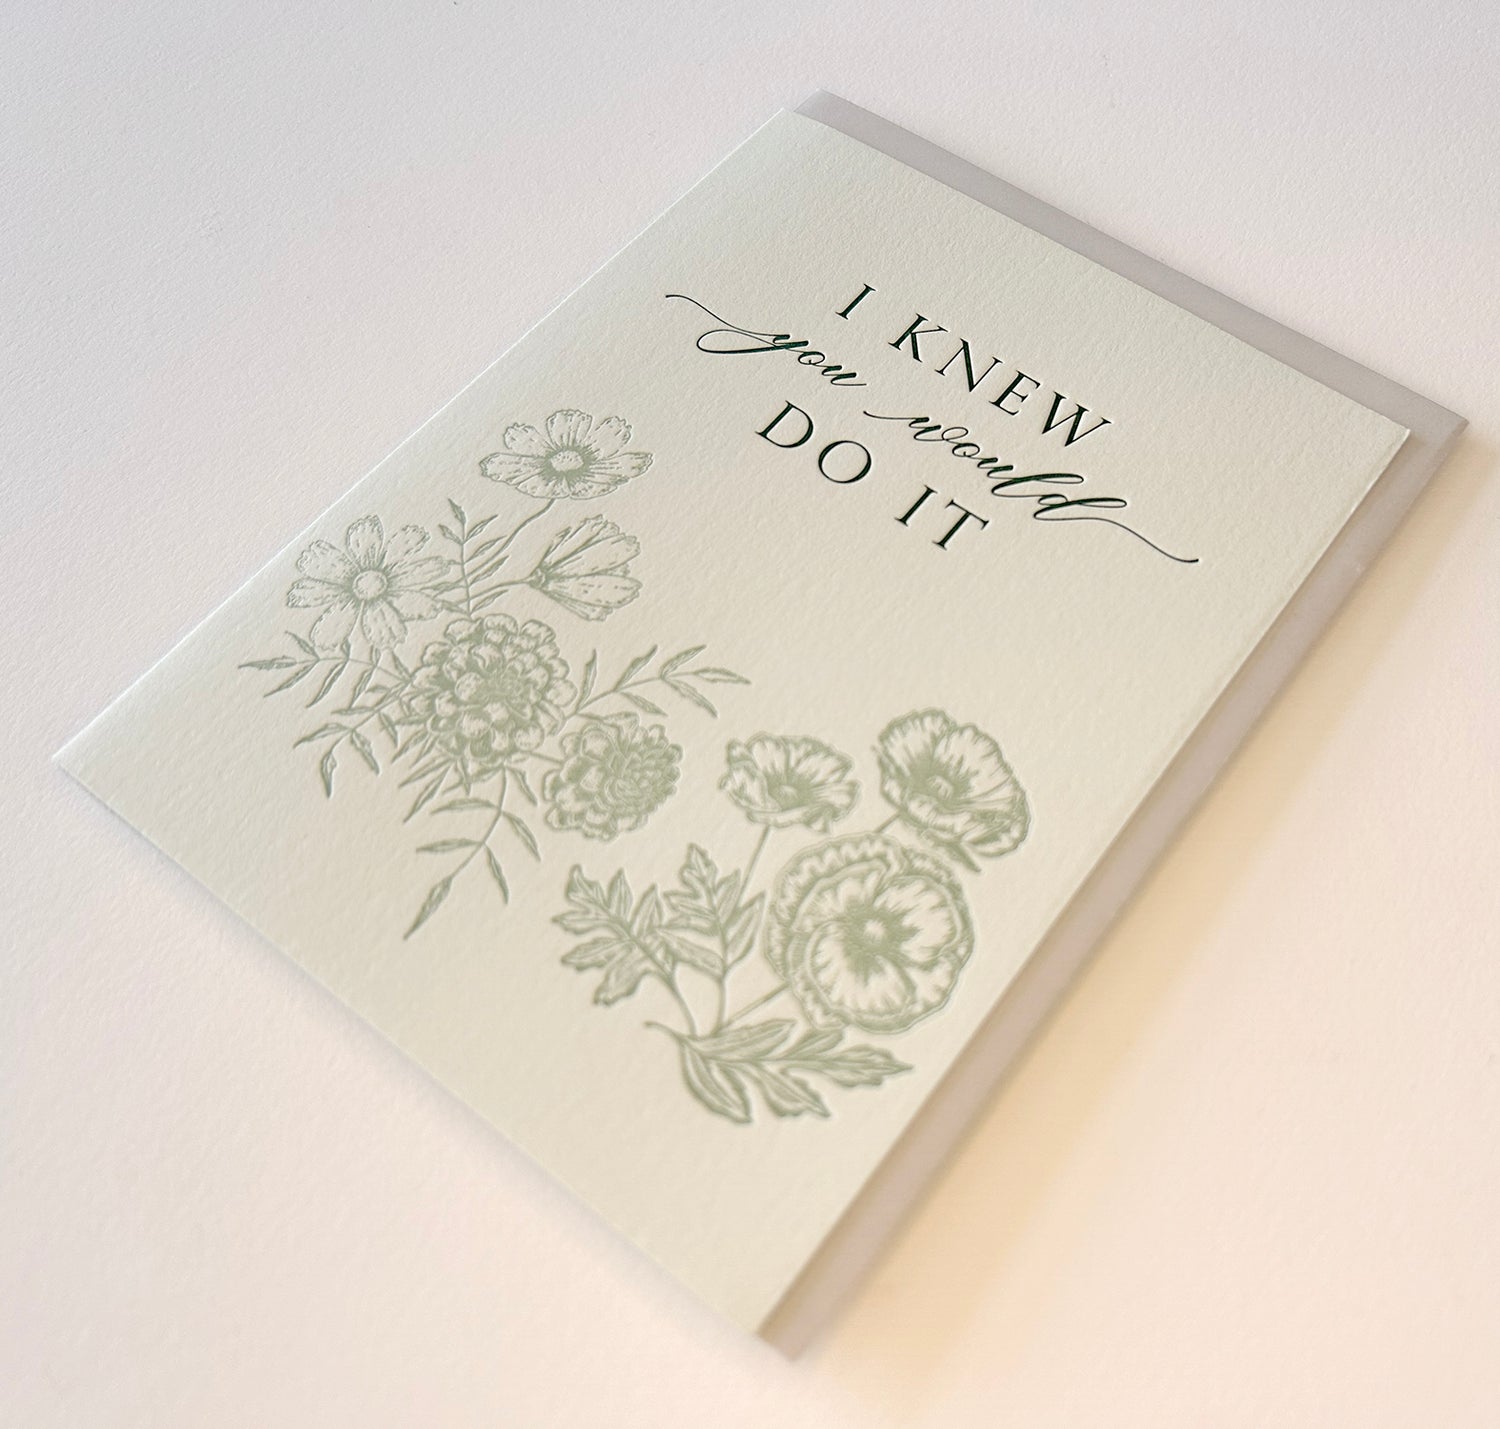 Letterpress congrats card with florals that says "I know you would do it" by Rust Belt Love